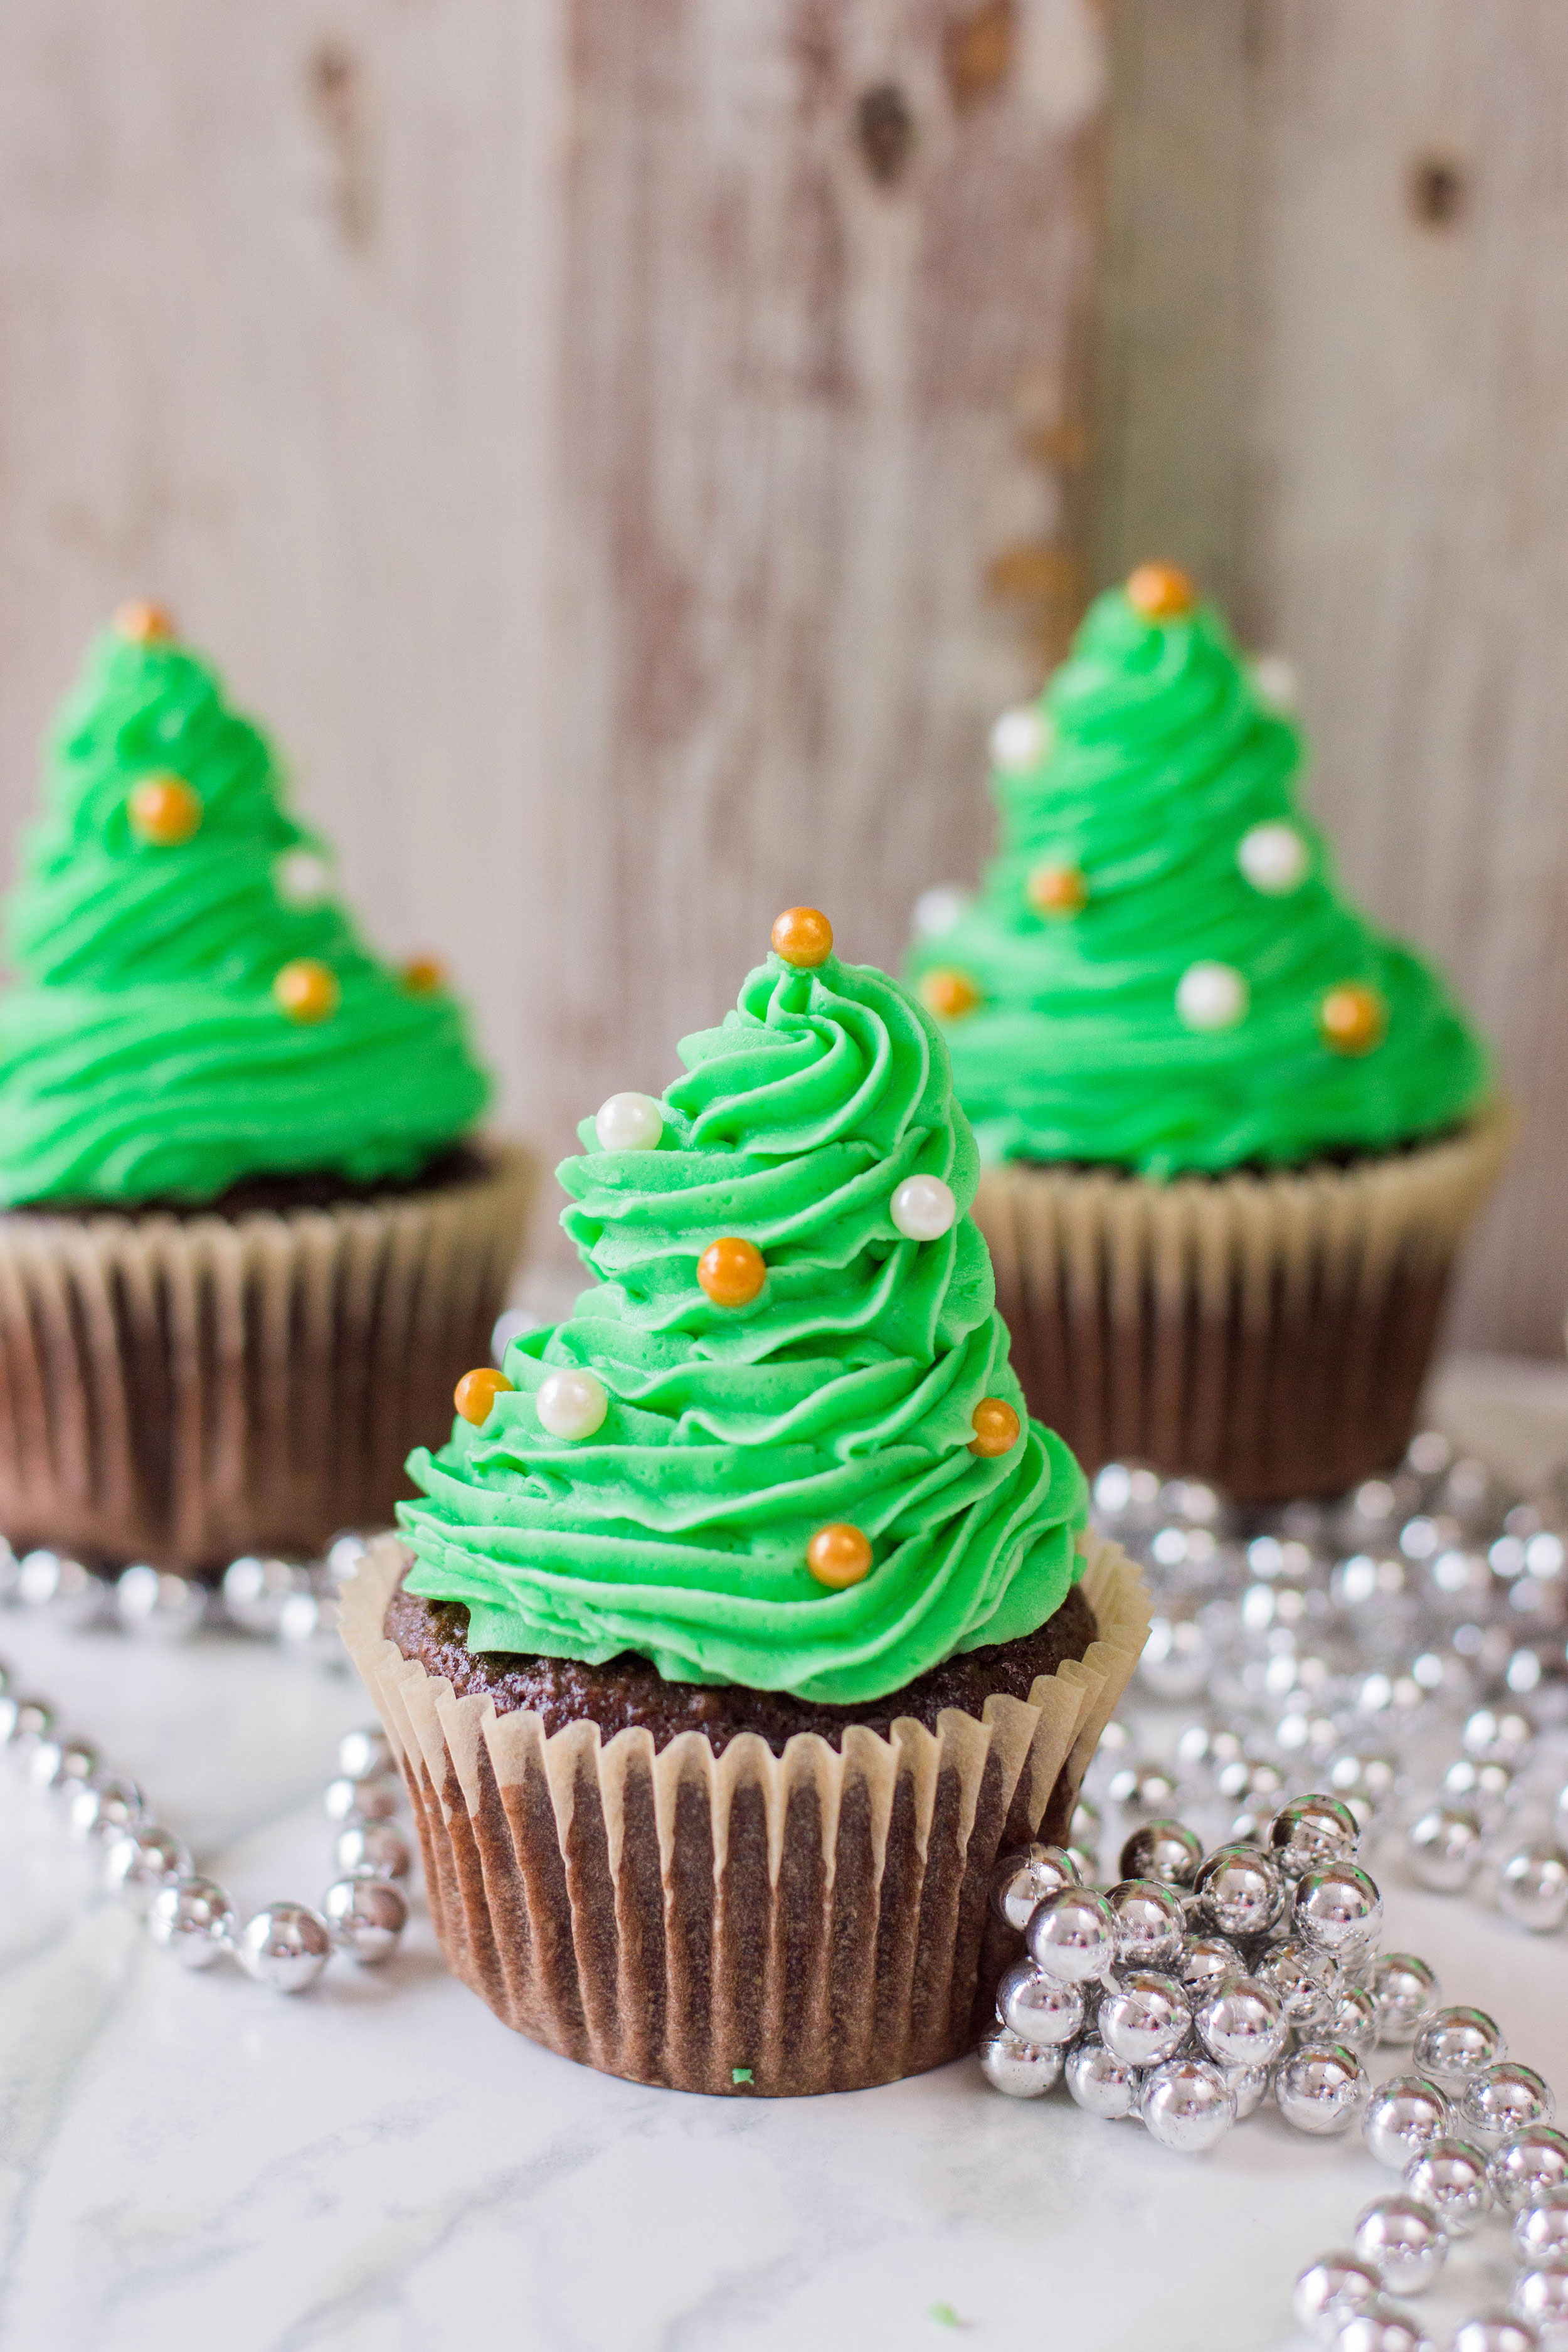 It's the time of the year to get festive with our desserts! These easy Christmas Tree Cupcakes is generously topped with homemade buttercream. Your sweet tooth will thank you later! #christmasdessert